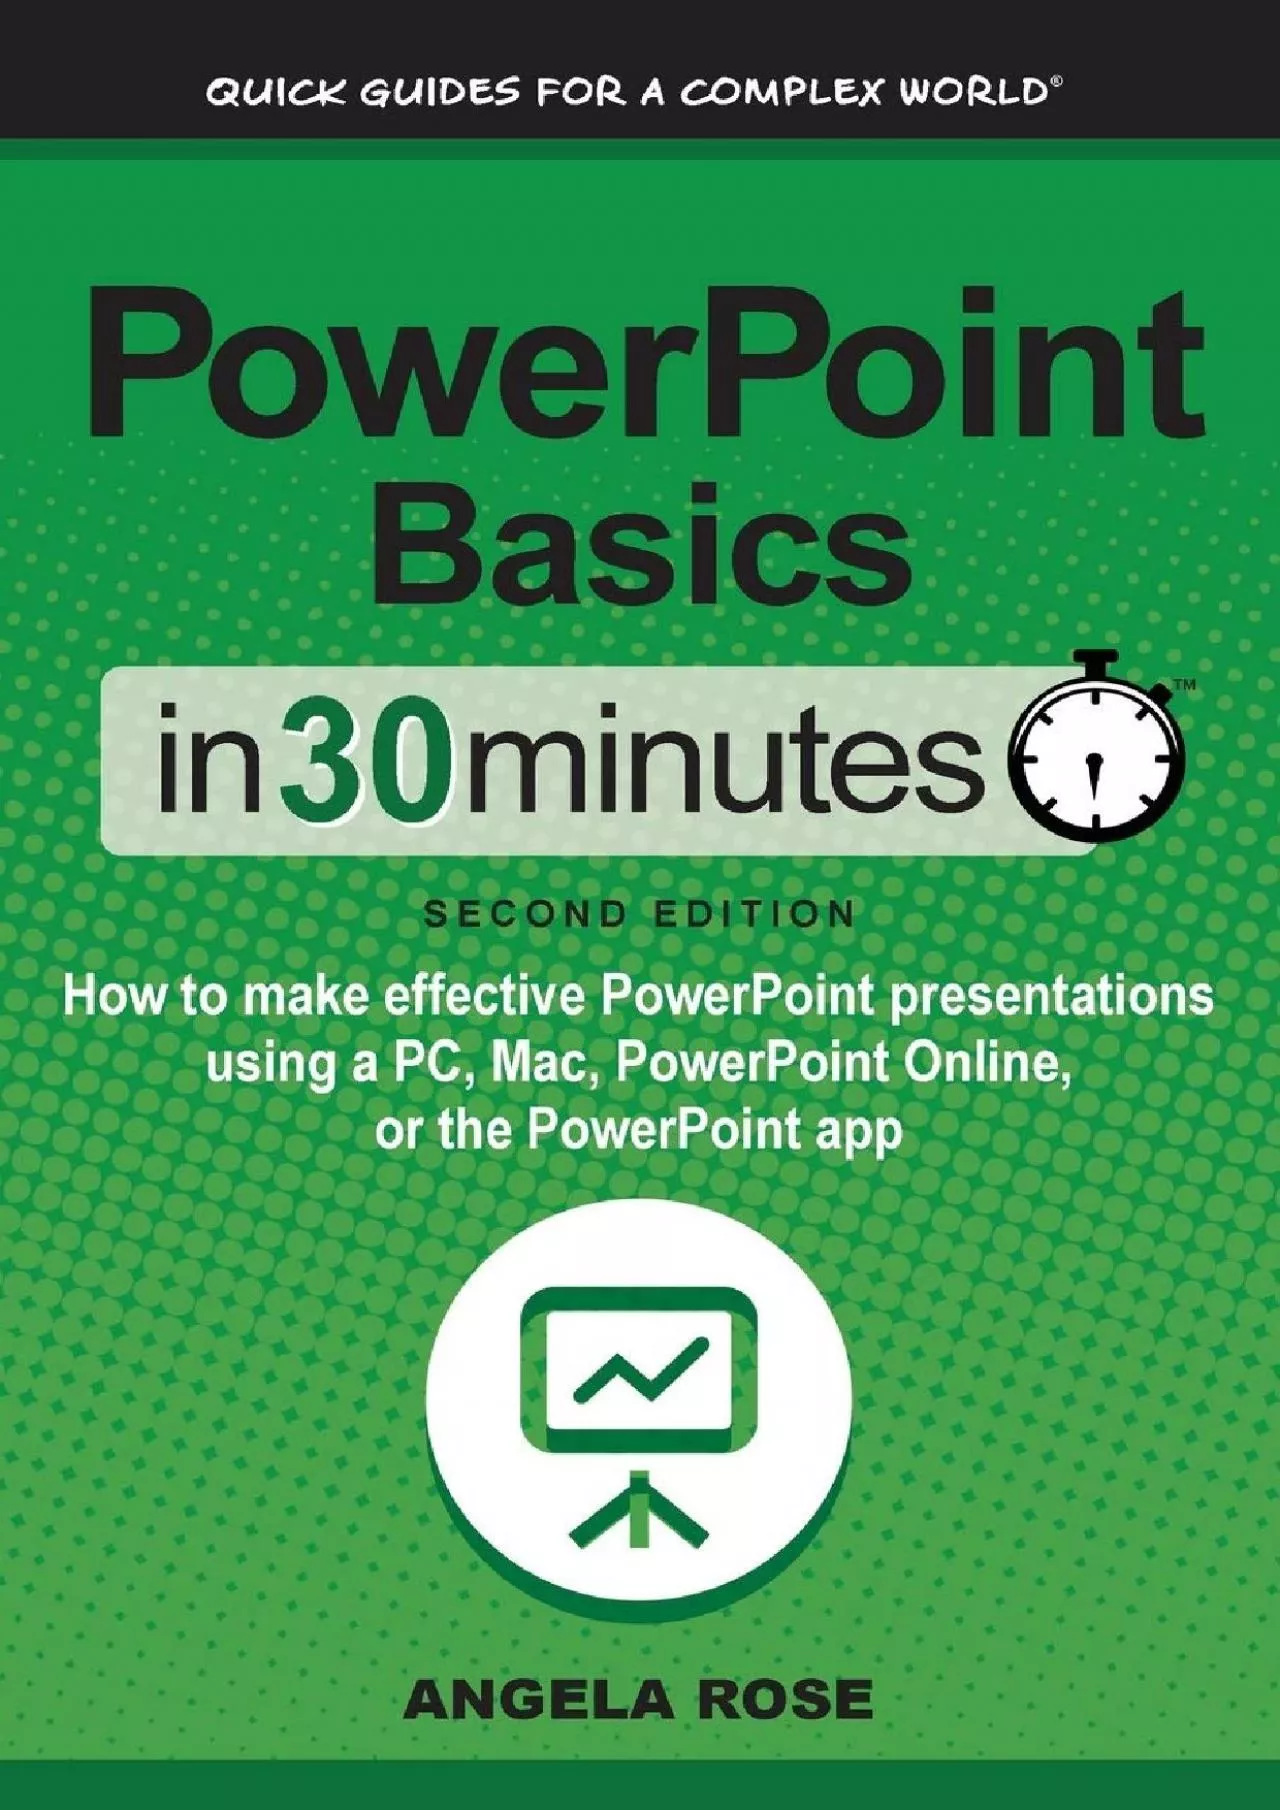 PowerPoint Basics In 30 Minutes: How to make effective PowerPoint presentations using